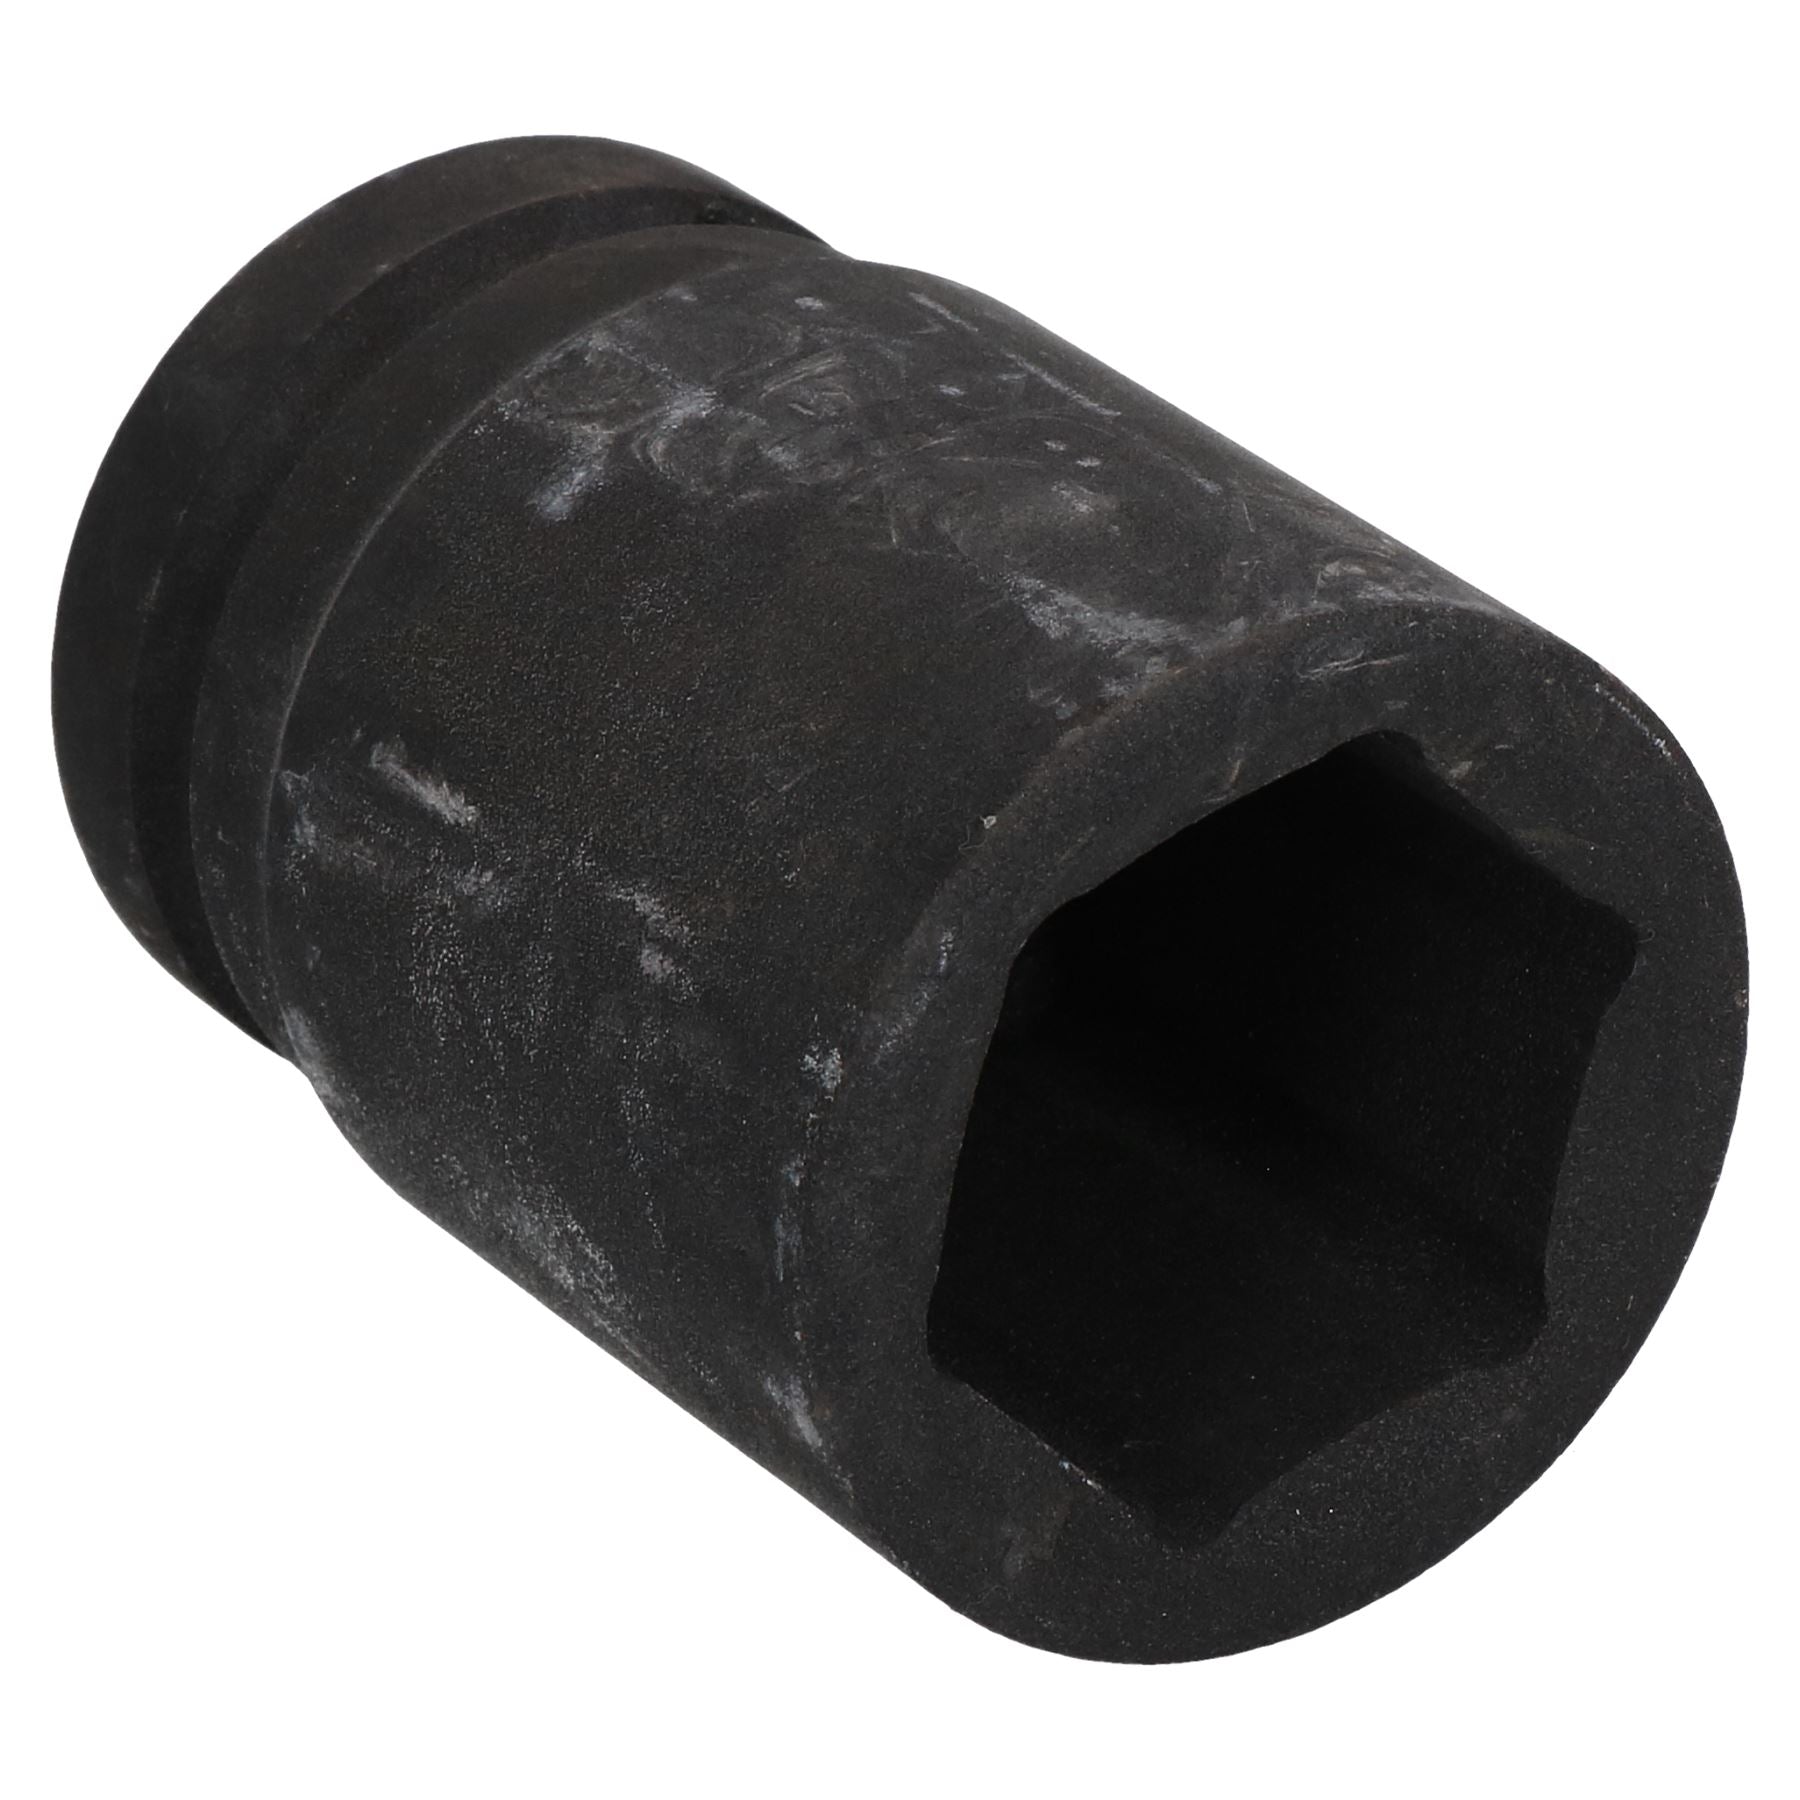 38mm Metric 3/4" or 1" Drive Deep Impact Socket 6 Sided With Step Up Adapter